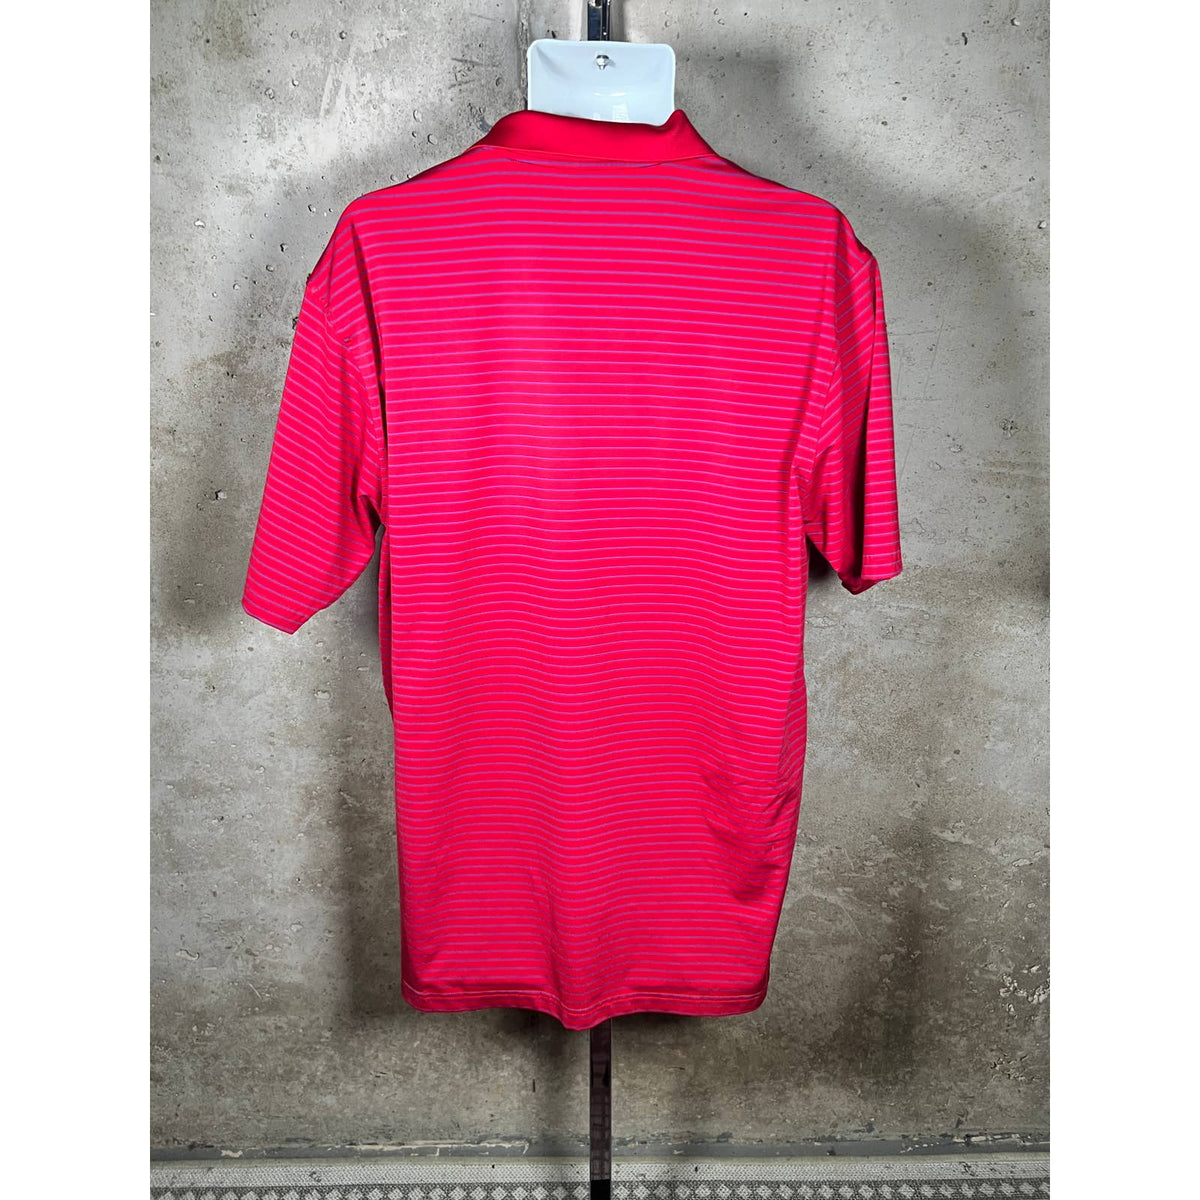 Turtleson Red Tour Performance Striped East Lake Golf Club Polo Sz. Large